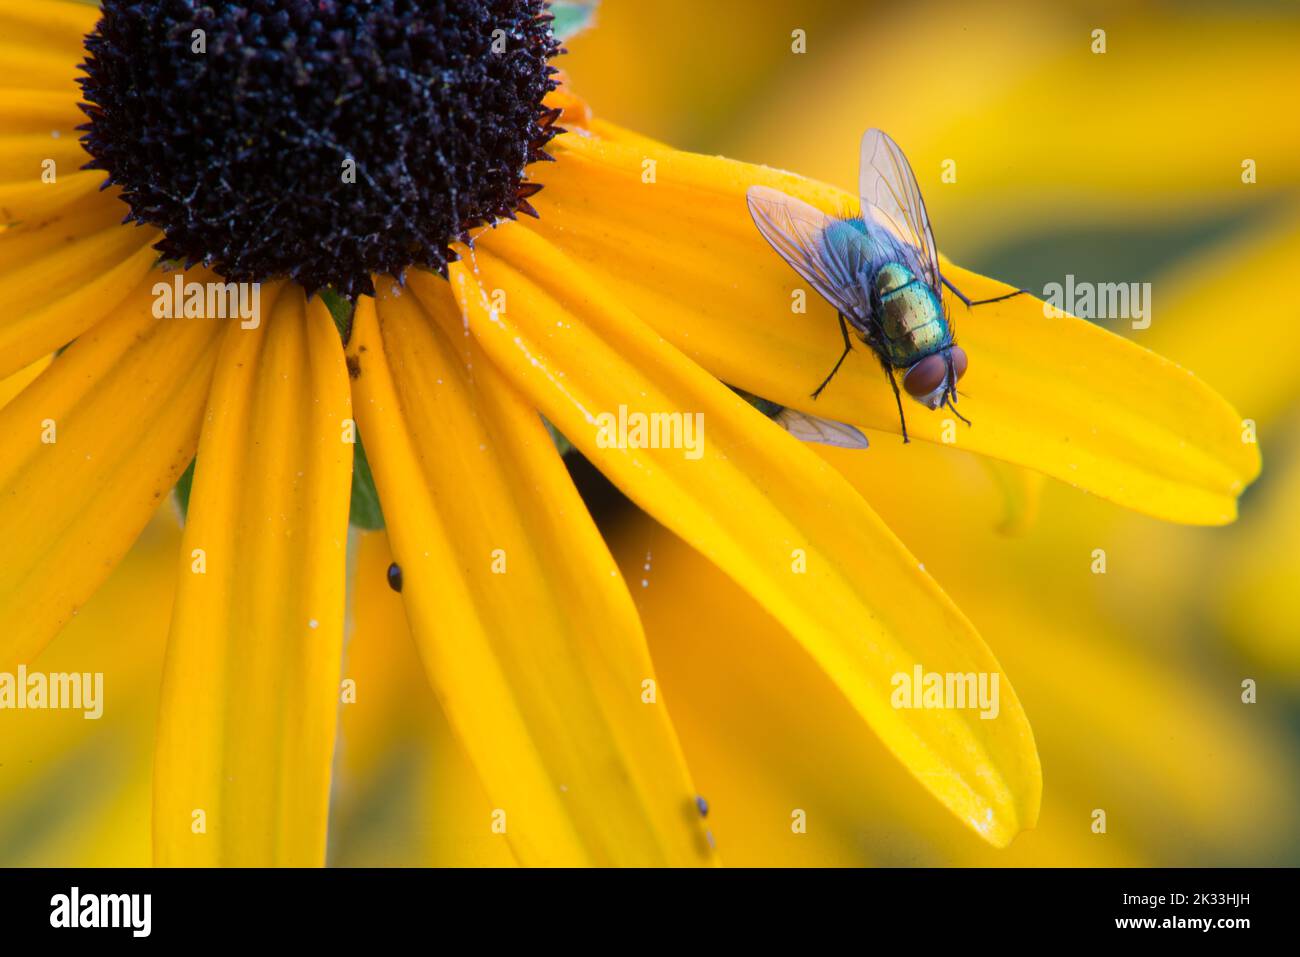 At dawn a common housefly waits for the sun to  warm them on the petal of a black-eyed susan. Stock Photo